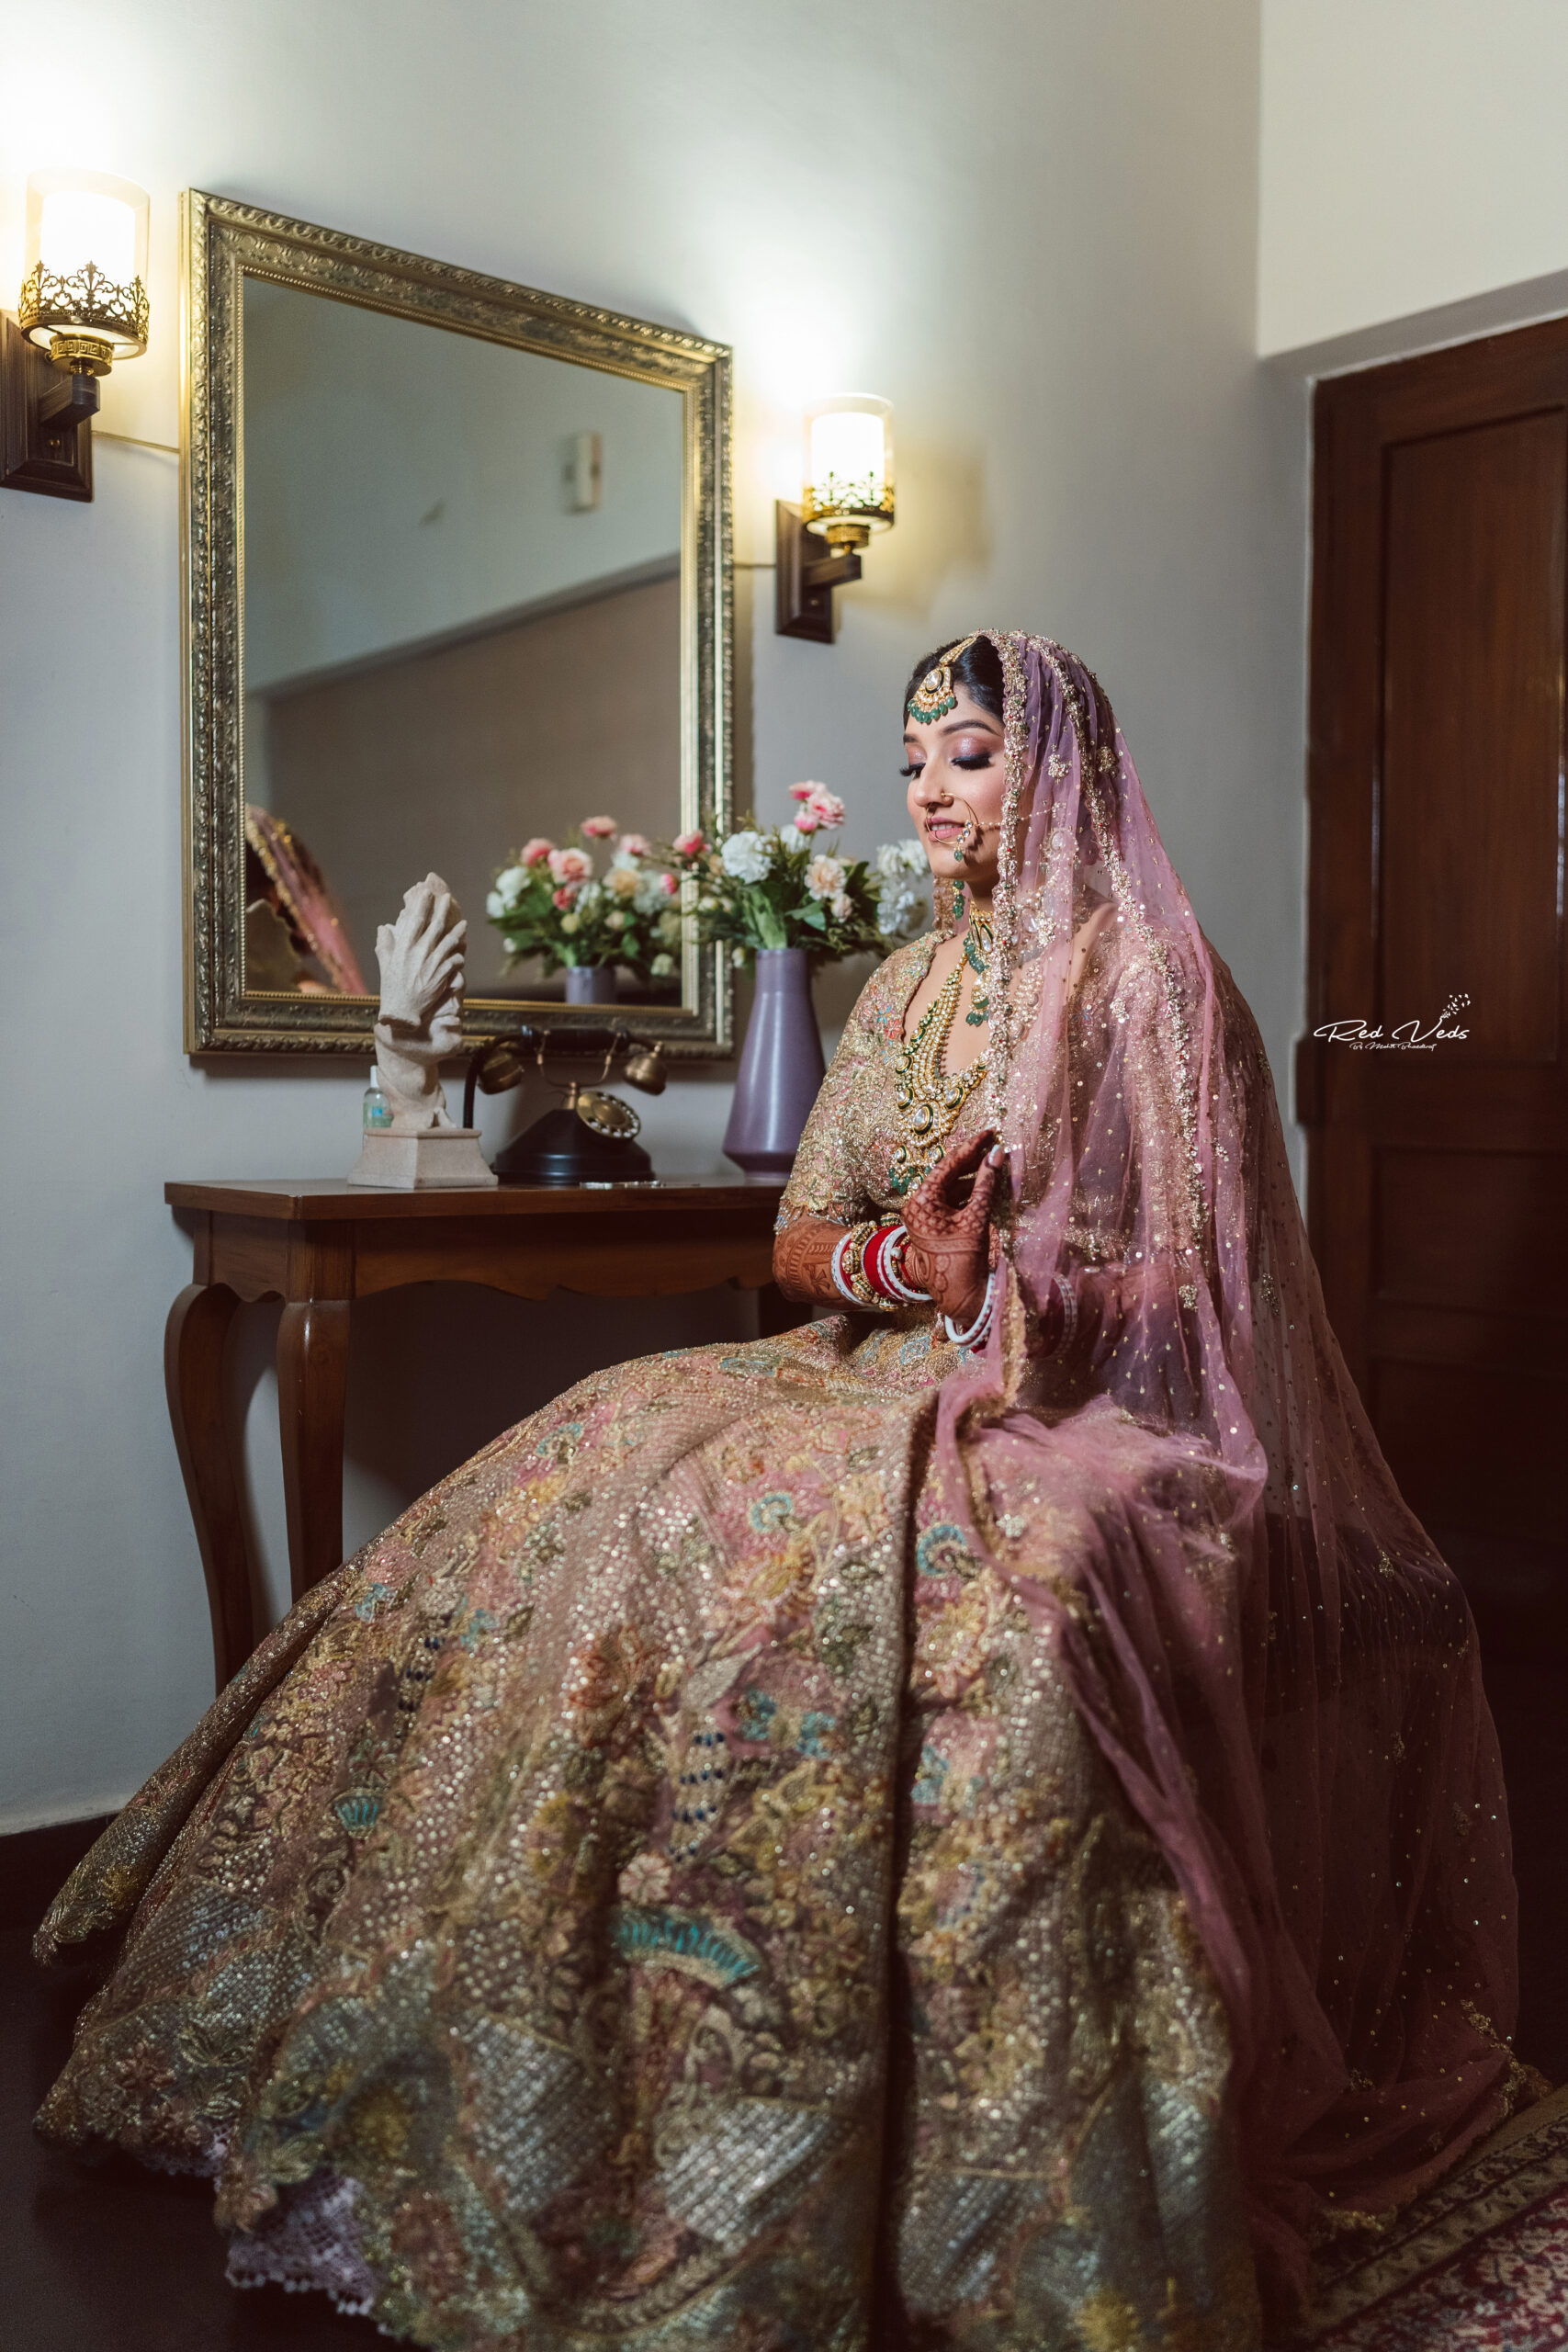 Pin by Dew Drop 🎀 on Bangladeshi Brides | Indian bride photography poses,  Indian wedding couple photography, Indian wedding bride